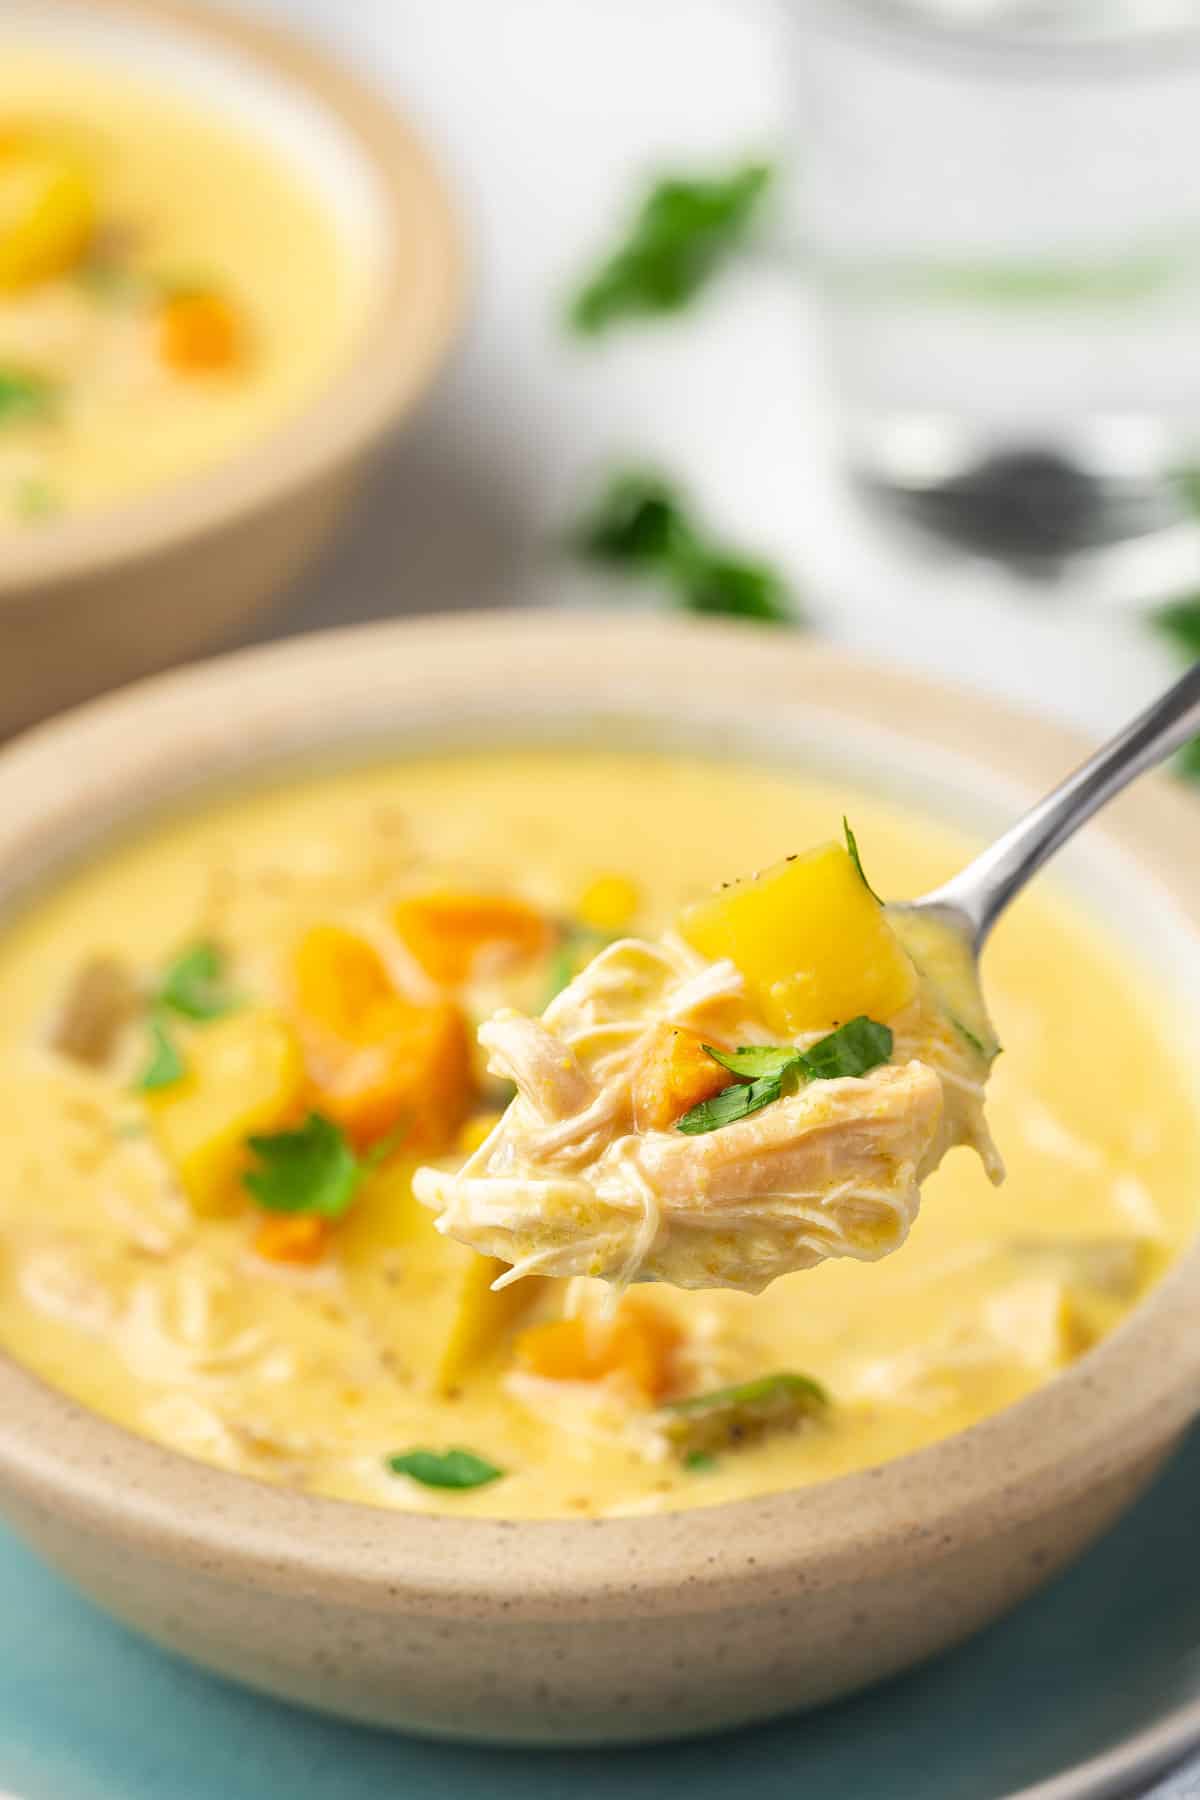 A spoonful of slow cooker chicken and corn soup lifted from the bowl of soup.